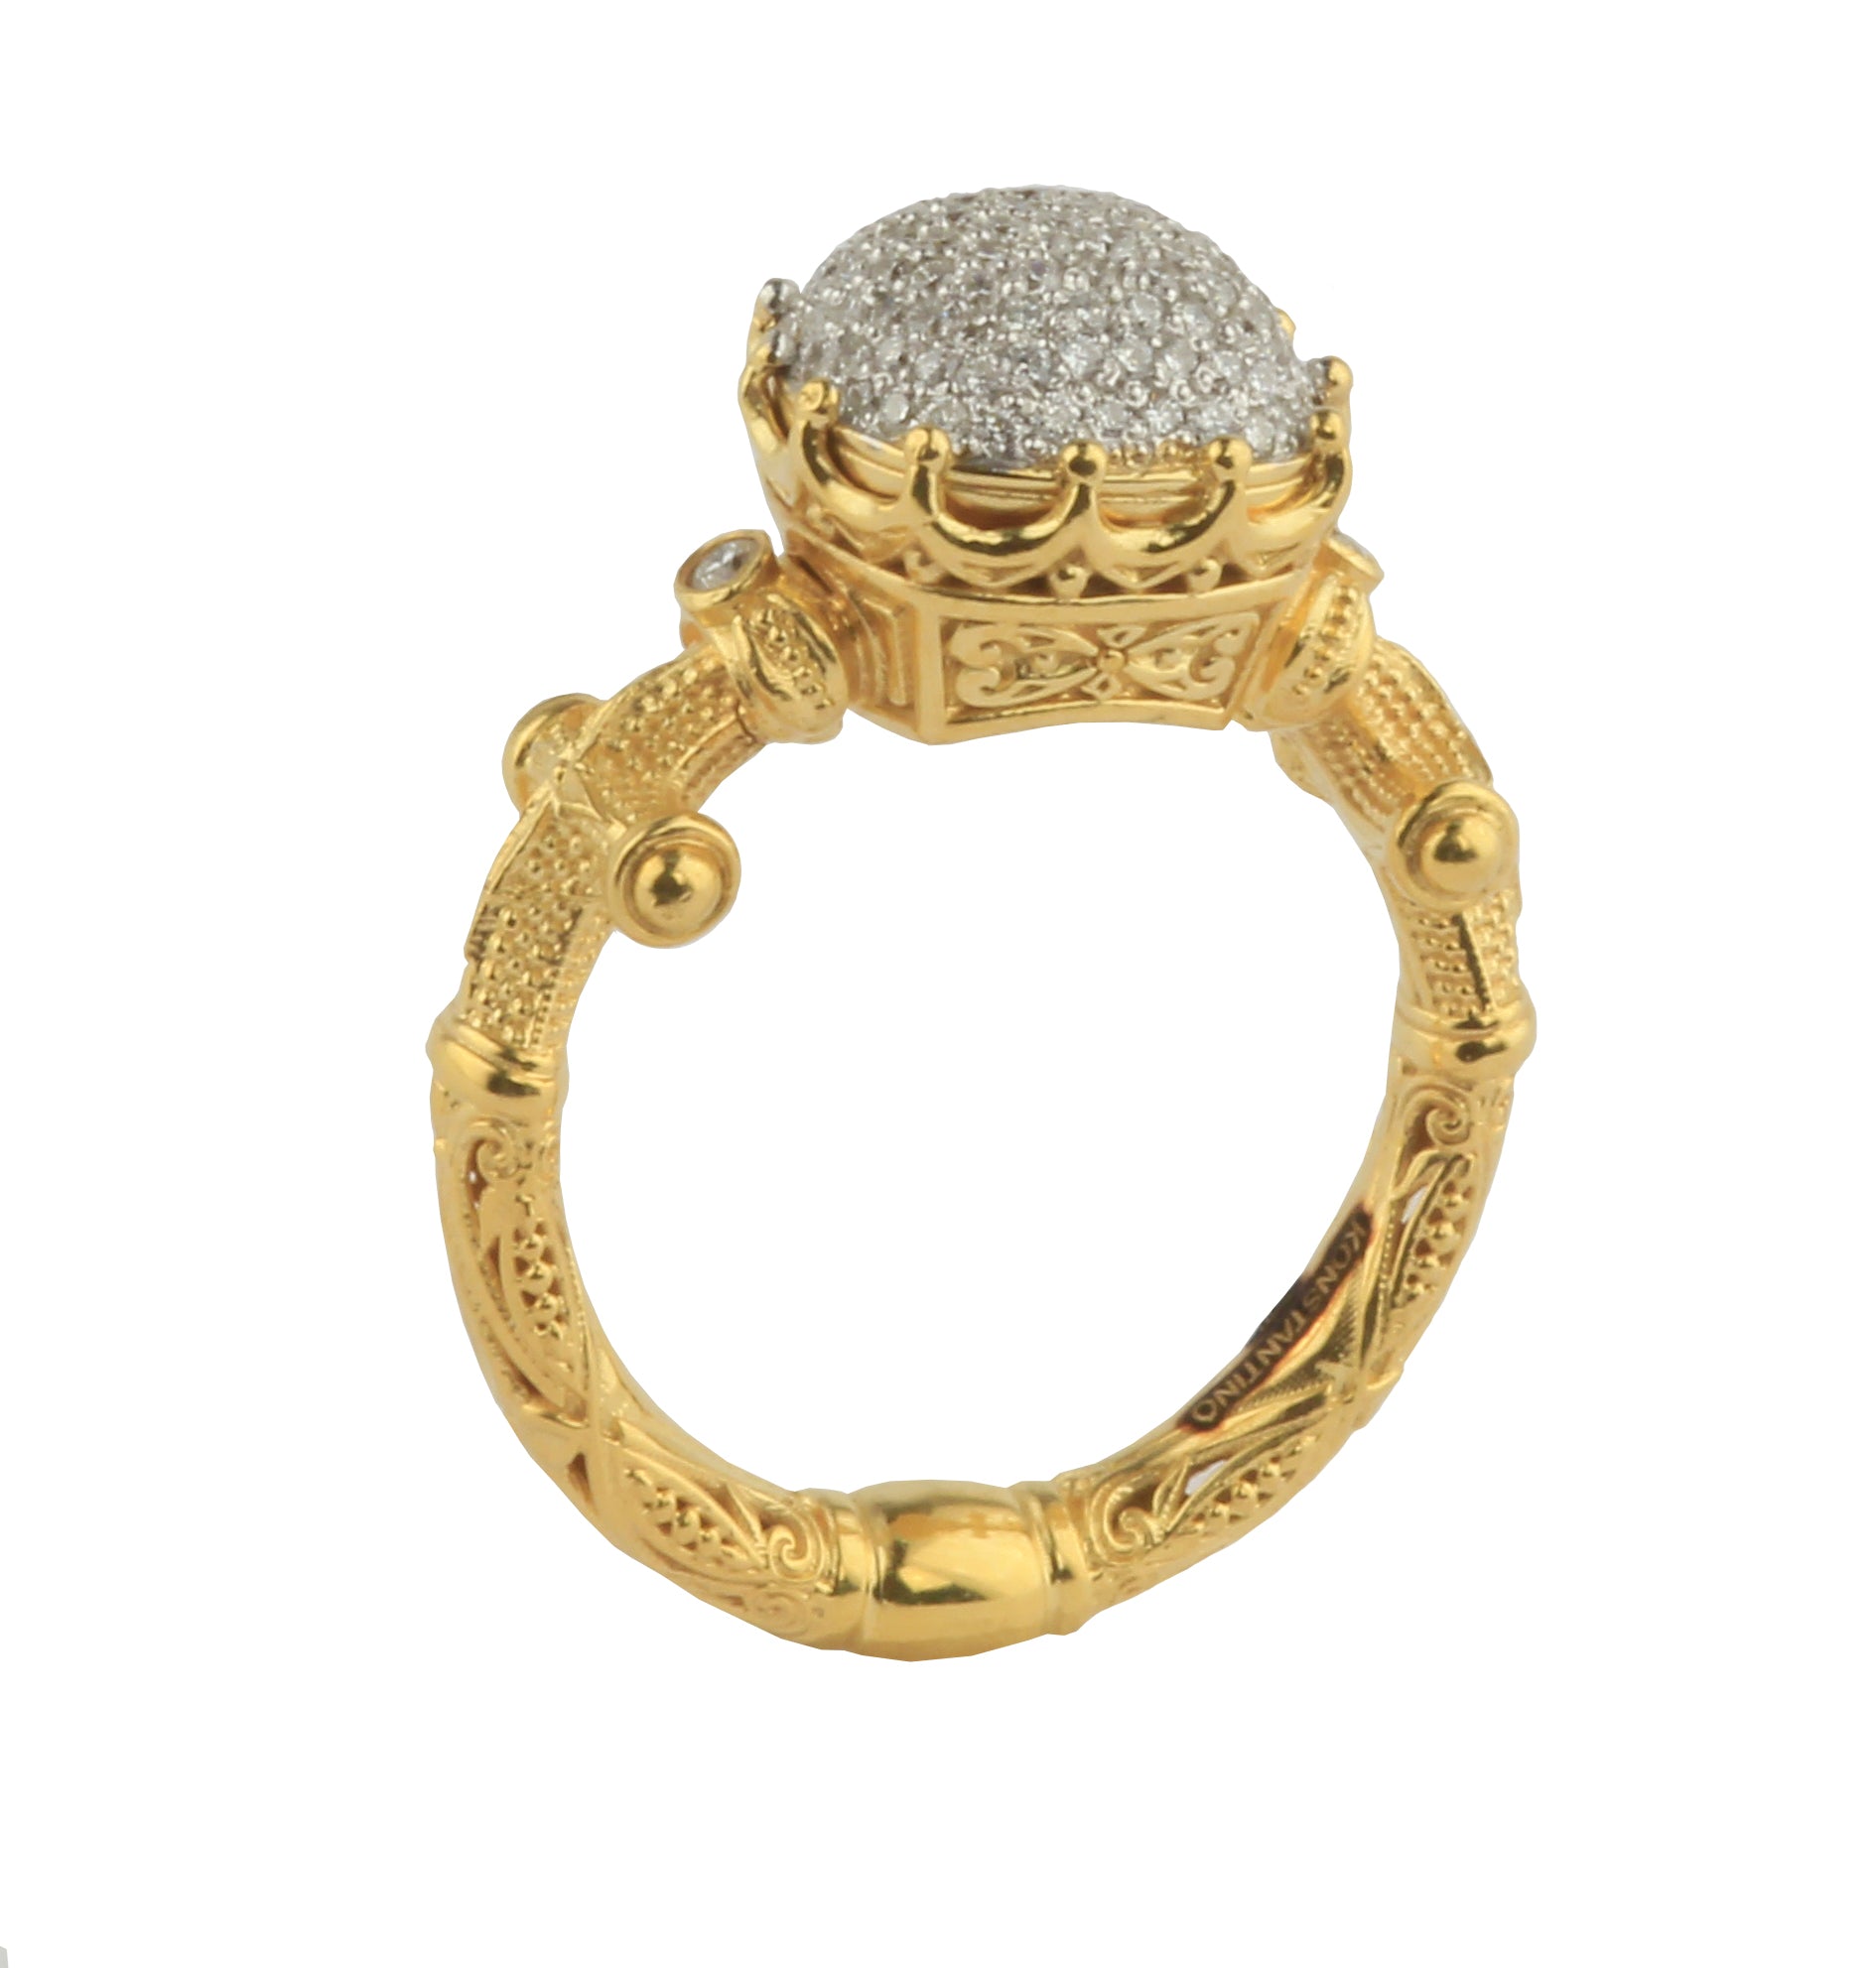 KONSTANTINO 18KT GOLD (5.30GR +/-) DIAMOND (0.55CT +/-) RING FROM THE FLAMENCO GOLD  COLLECTION